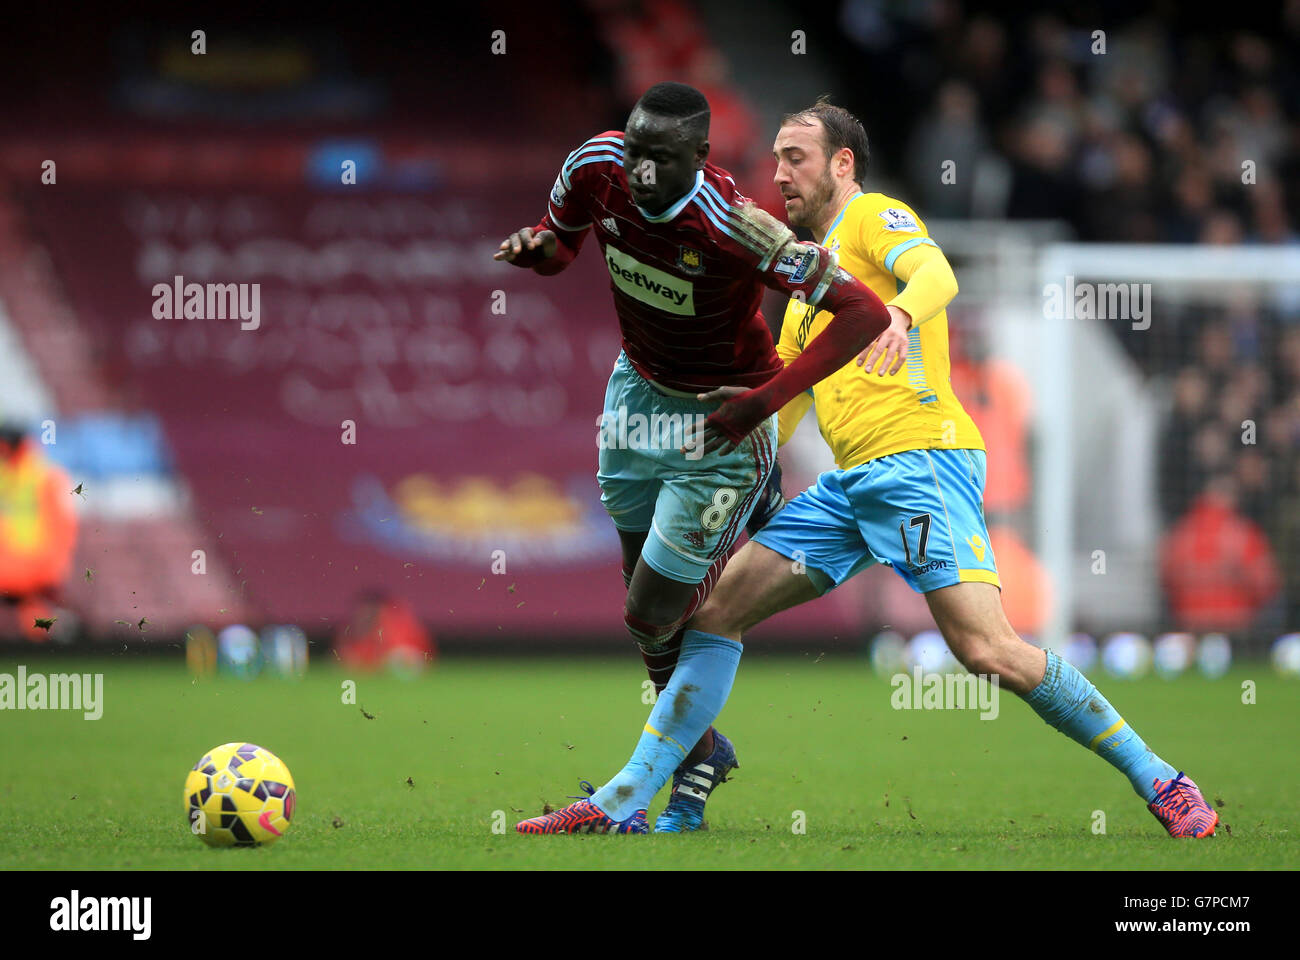 Crystal Palace's Glenn Murray (right) fouls West Ham United's Cheikhou Kouyate but escapes a second yellow card during the Barclays Premier League match at Upton Park, London. PRESS ASSOCIATION Photo. Picture date: Saturday February 28, 2015. See PA story SOCCER West Ham. Photo credit should read: Nick Potts/PA Wire. Stock Photo